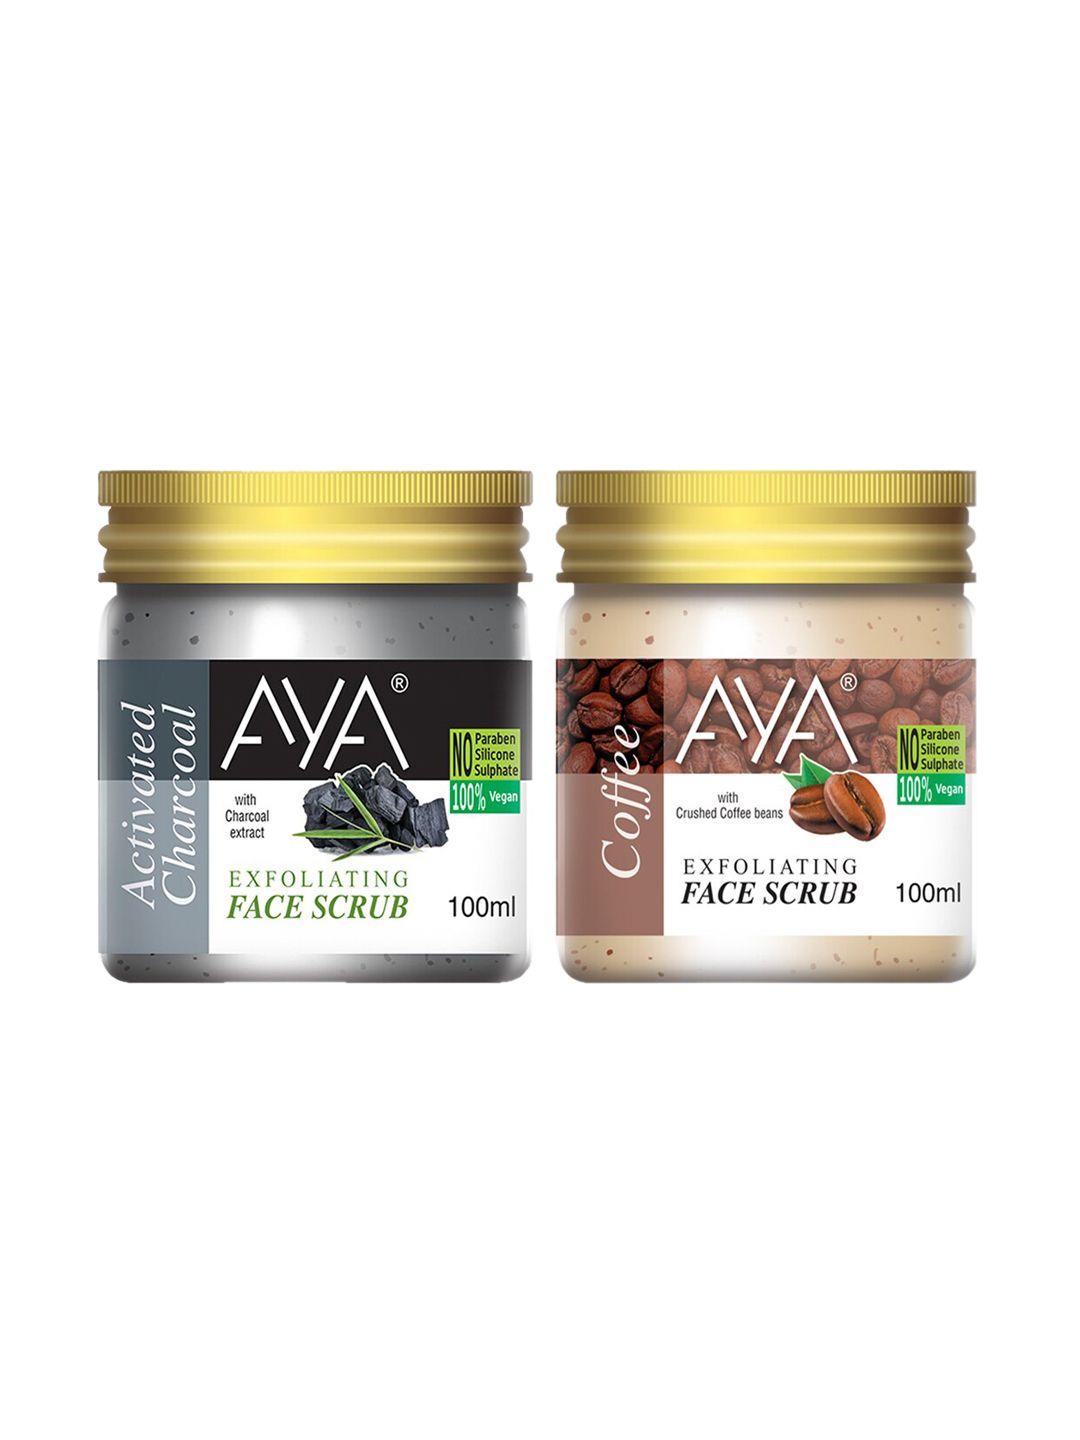 aya set of activated charcoal & coffee exfoliating face scrubs - 100 ml each